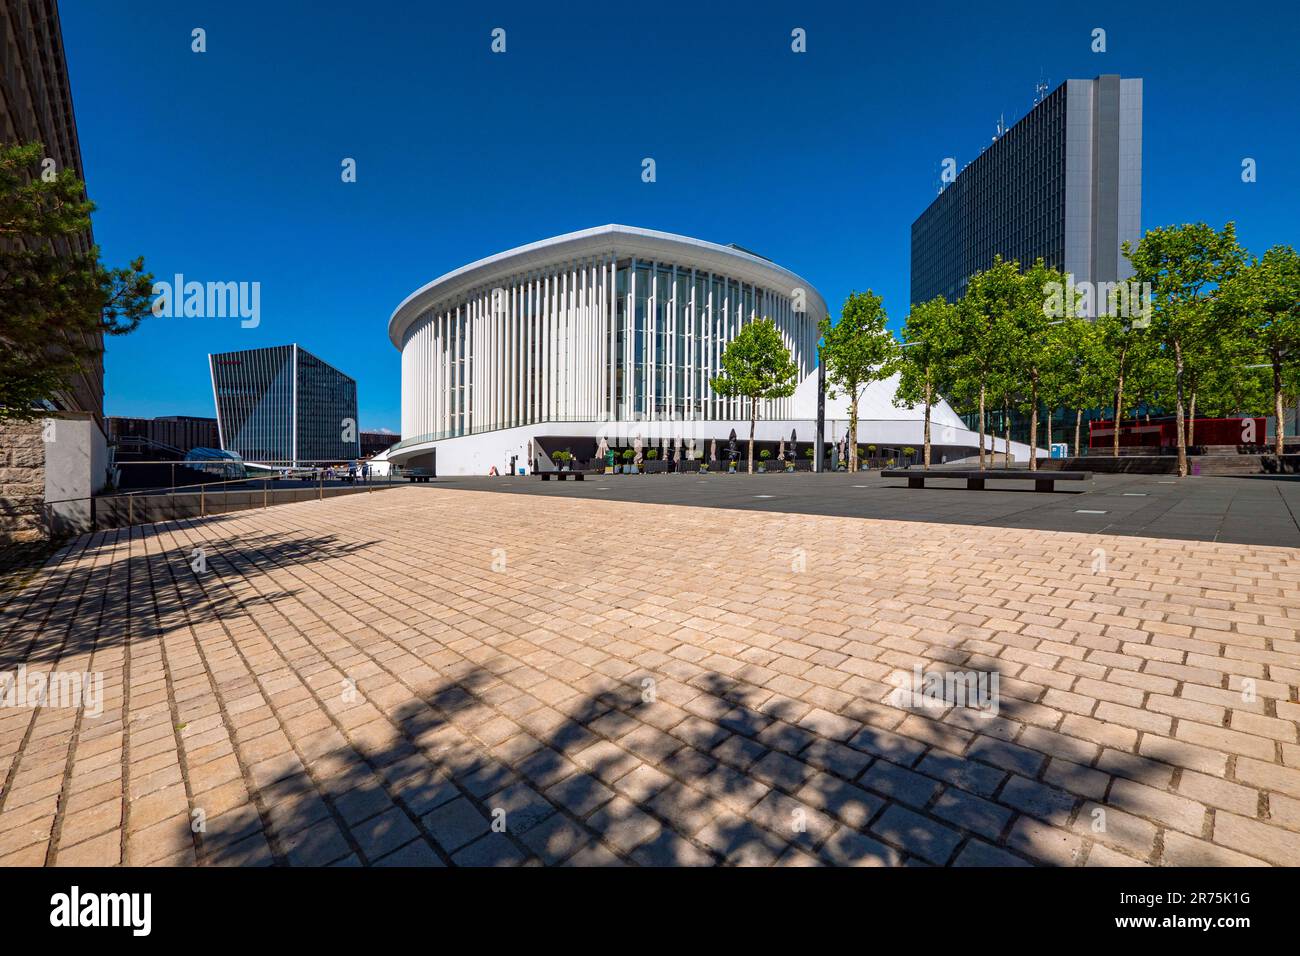 New Philharmonic Hall, Kirchberg, Luxembourg City, Benelux, pays du Benelux, Luxembourg Banque D'Images